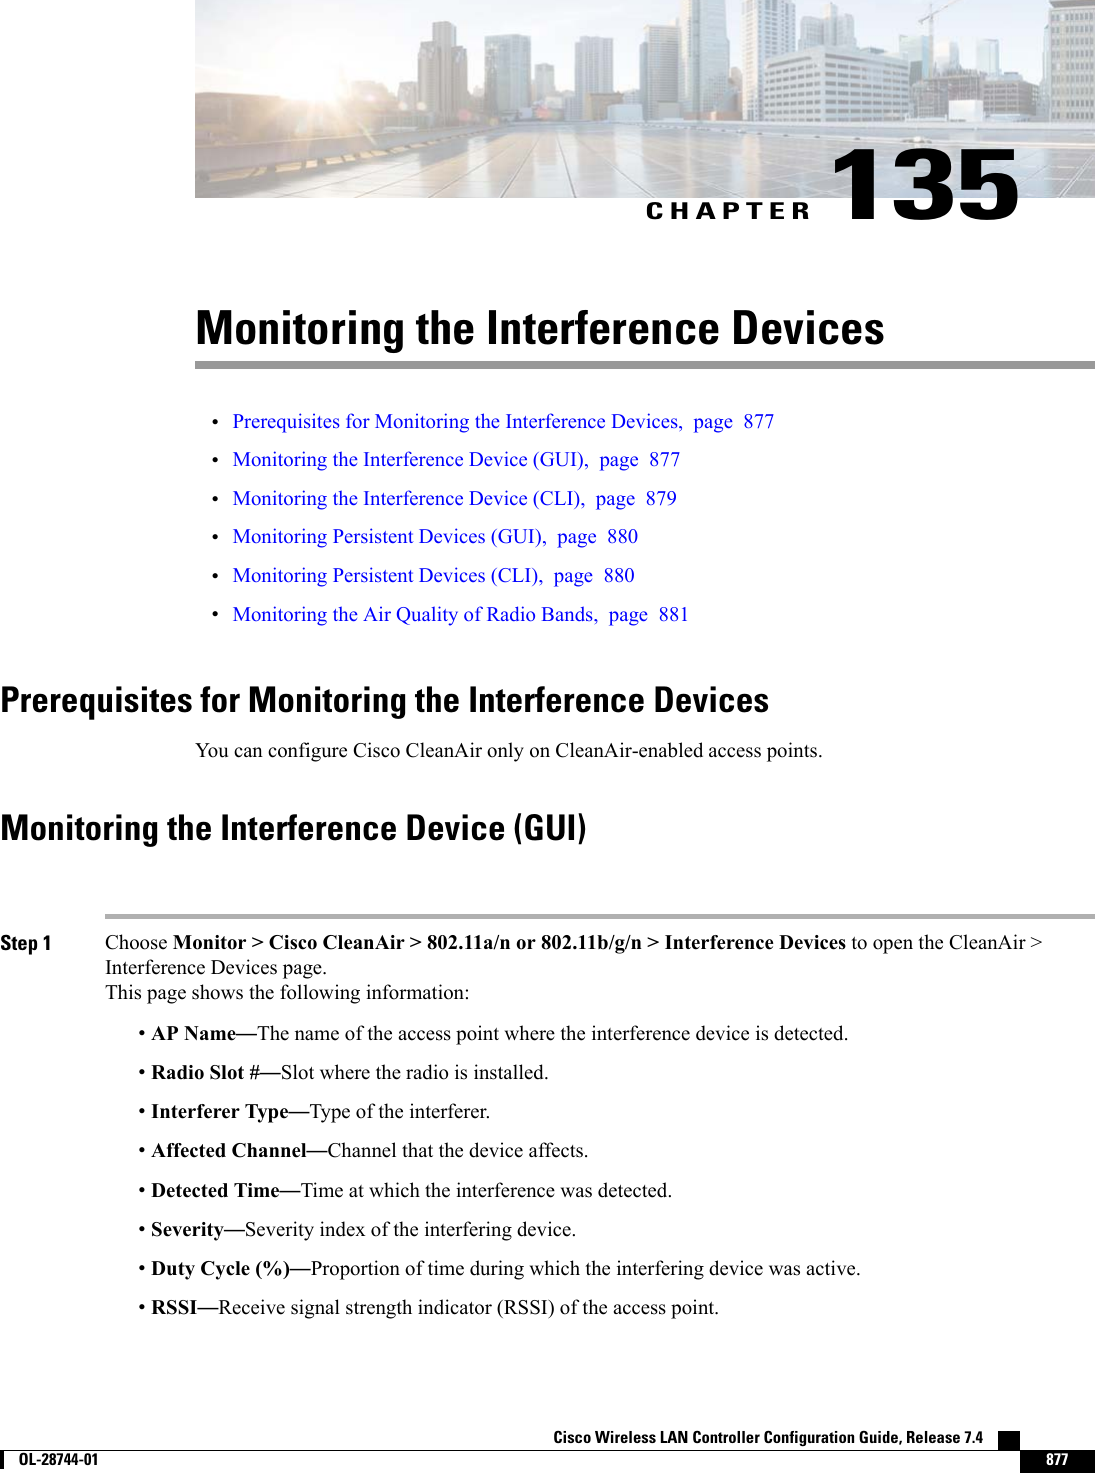 CHAPTER 135Monitoring the Interference Devices•Prerequisites for Monitoring the Interference Devices, page 877•Monitoring the Interference Device (GUI), page 877•Monitoring the Interference Device (CLI), page 879•Monitoring Persistent Devices (GUI), page 880•Monitoring Persistent Devices (CLI), page 880•Monitoring the Air Quality of Radio Bands, page 881Prerequisites for Monitoring the Interference DevicesYou can configure Cisco CleanAir only on CleanAir-enabled access points.Monitoring the Interference Device (GUI)Step 1 Choose Monitor &gt; Cisco CleanAir &gt; 802.11a/n or 802.11b/g/n &gt; Interference Devices to open the CleanAir &gt;Interference Devices page.This page shows the following information:•AP Name—The name of the access point where the interference device is detected.•Radio Slot #—Slot where the radio is installed.•Interferer Type—Type of the interferer.•Affected Channel—Channel that the device affects.•Detected Time—Time at which the interference was detected.•Severity—Severity index of the interfering device.•Duty Cycle (%)—Proportion of time during which the interfering device was active.•RSSI—Receive signal strength indicator (RSSI) of the access point.Cisco Wireless LAN Controller Configuration Guide, Release 7.4        OL-28744-01 877